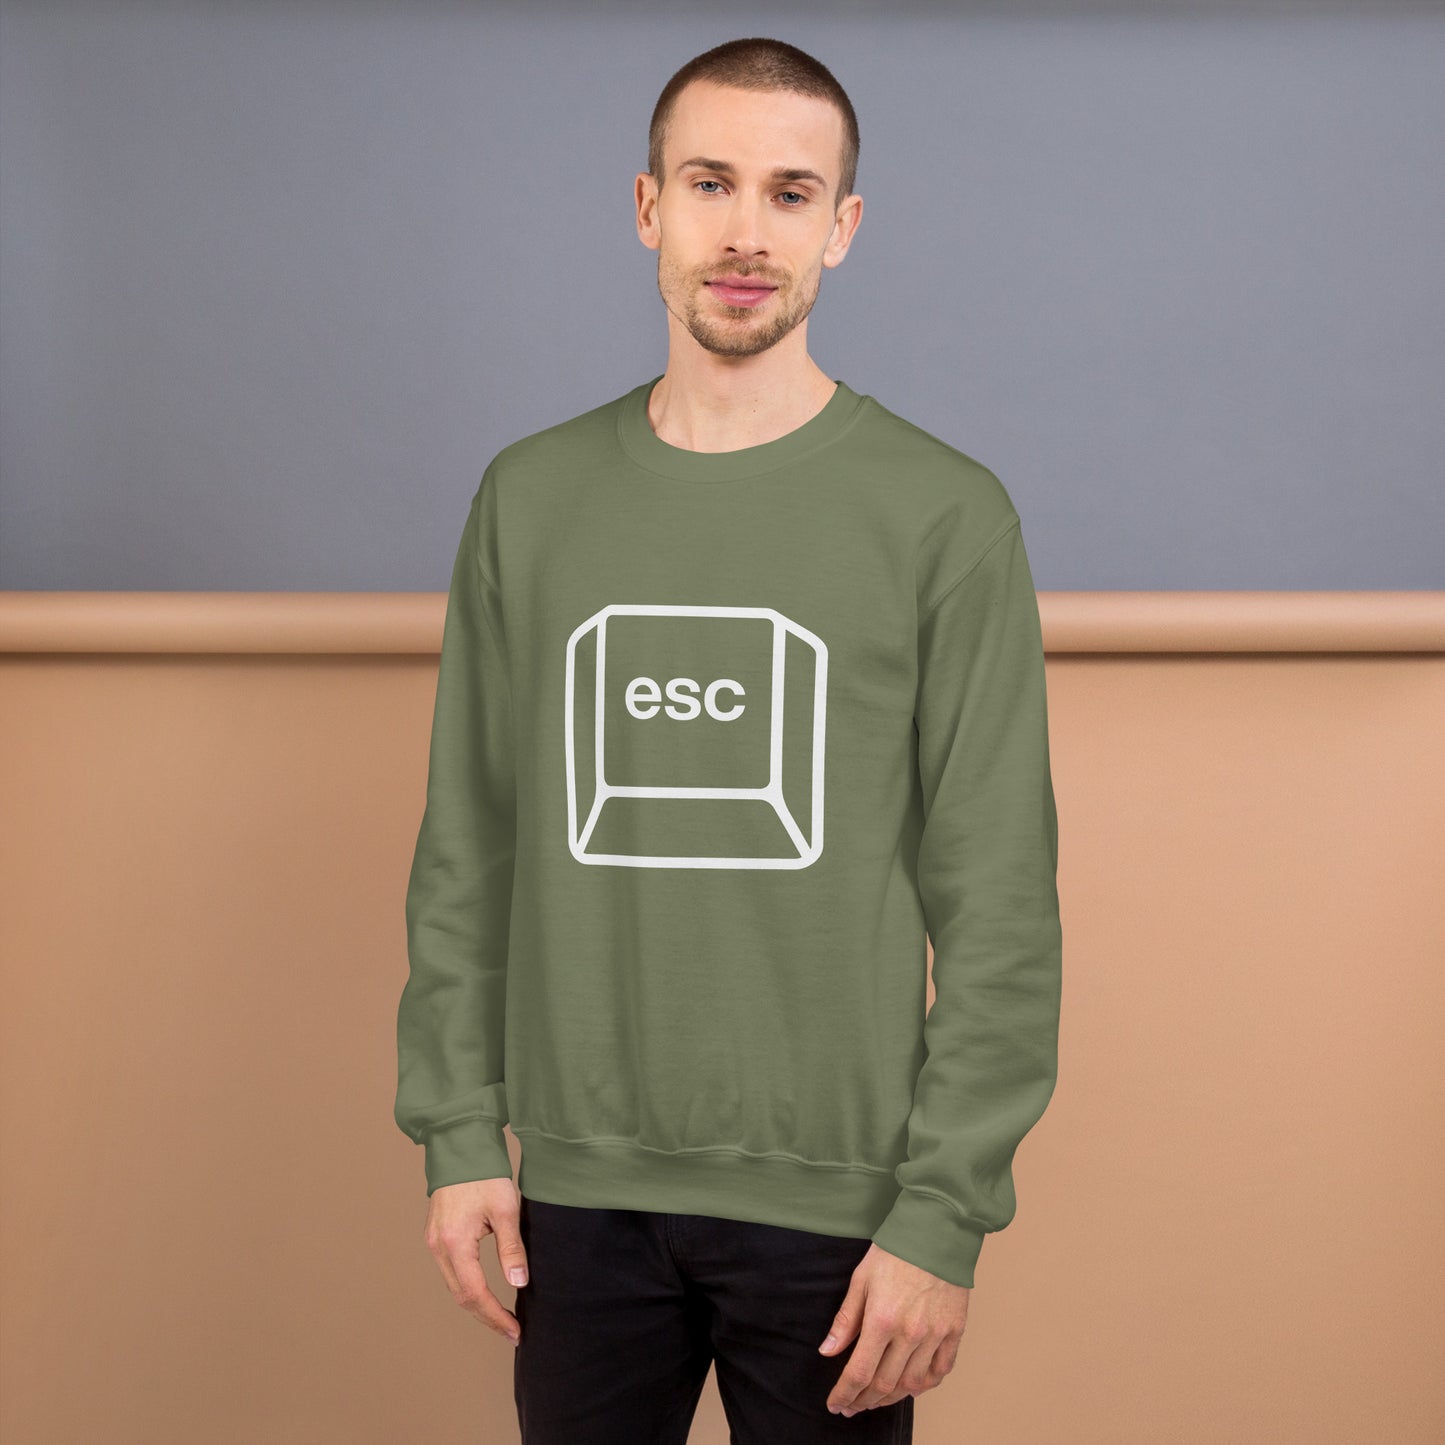 Man with military green sweatshirt with picture of esc key